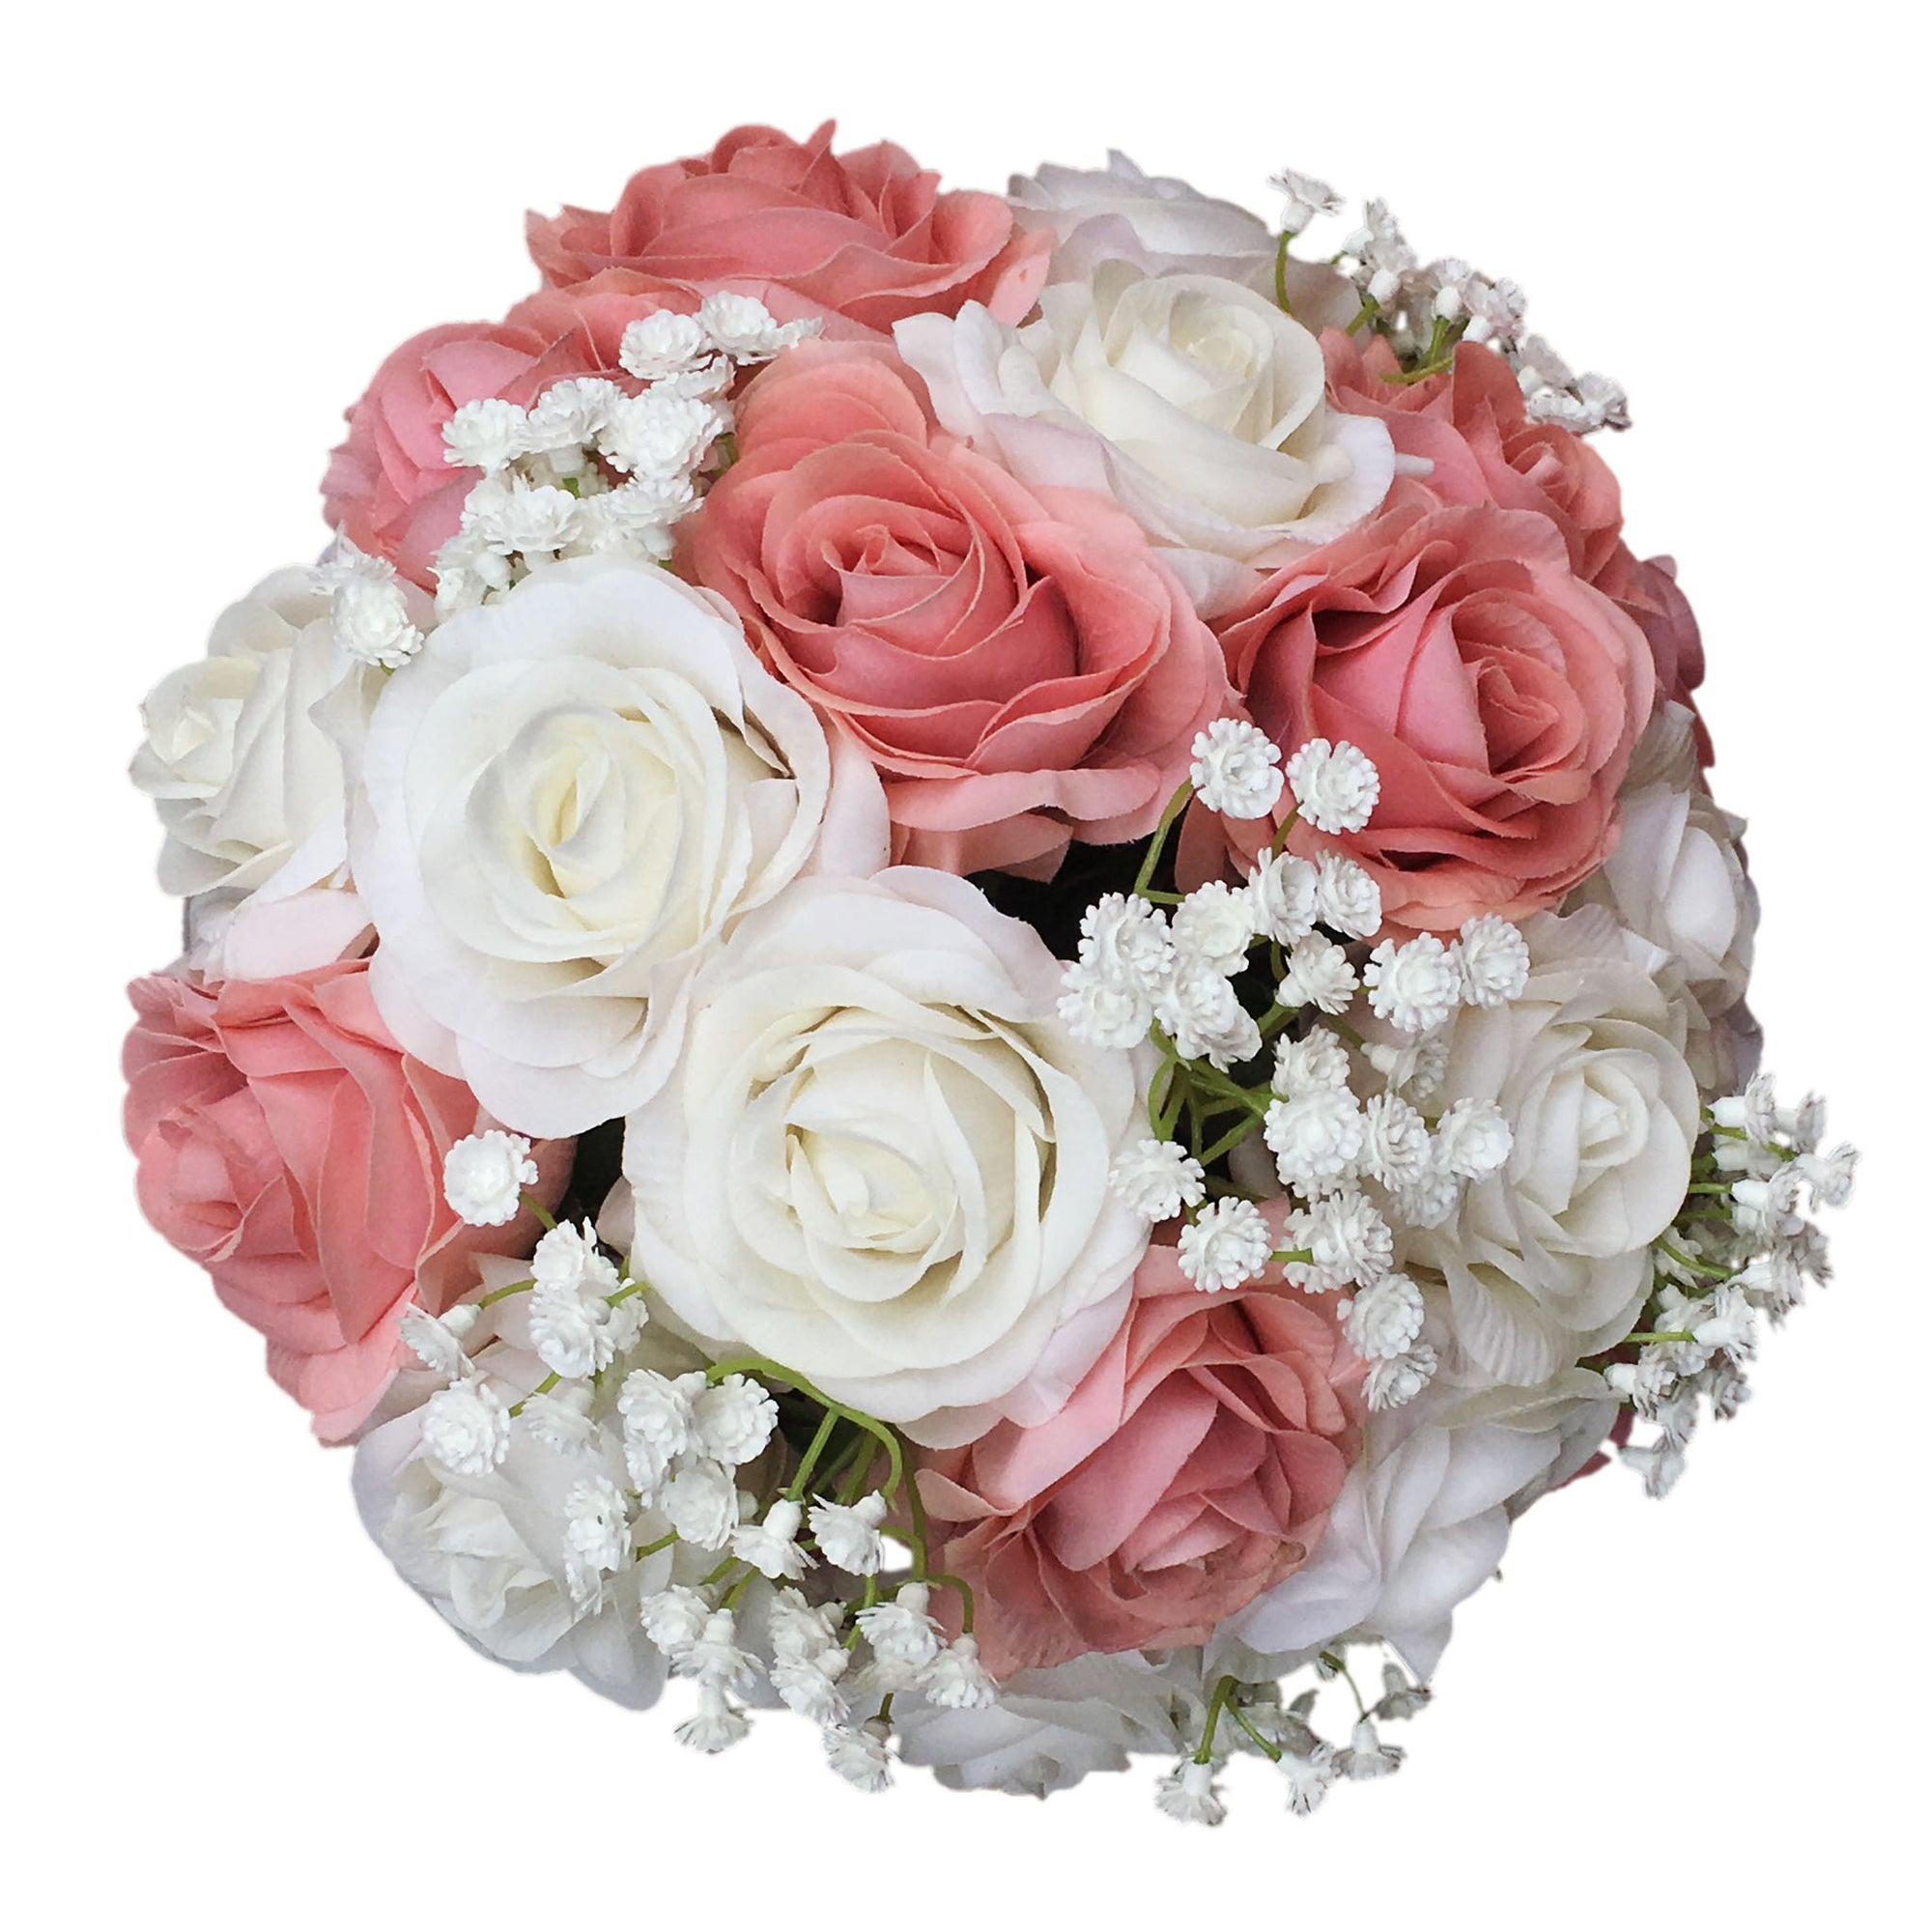 Dusty Rose and White Wedding Bouquet with Babysreahth